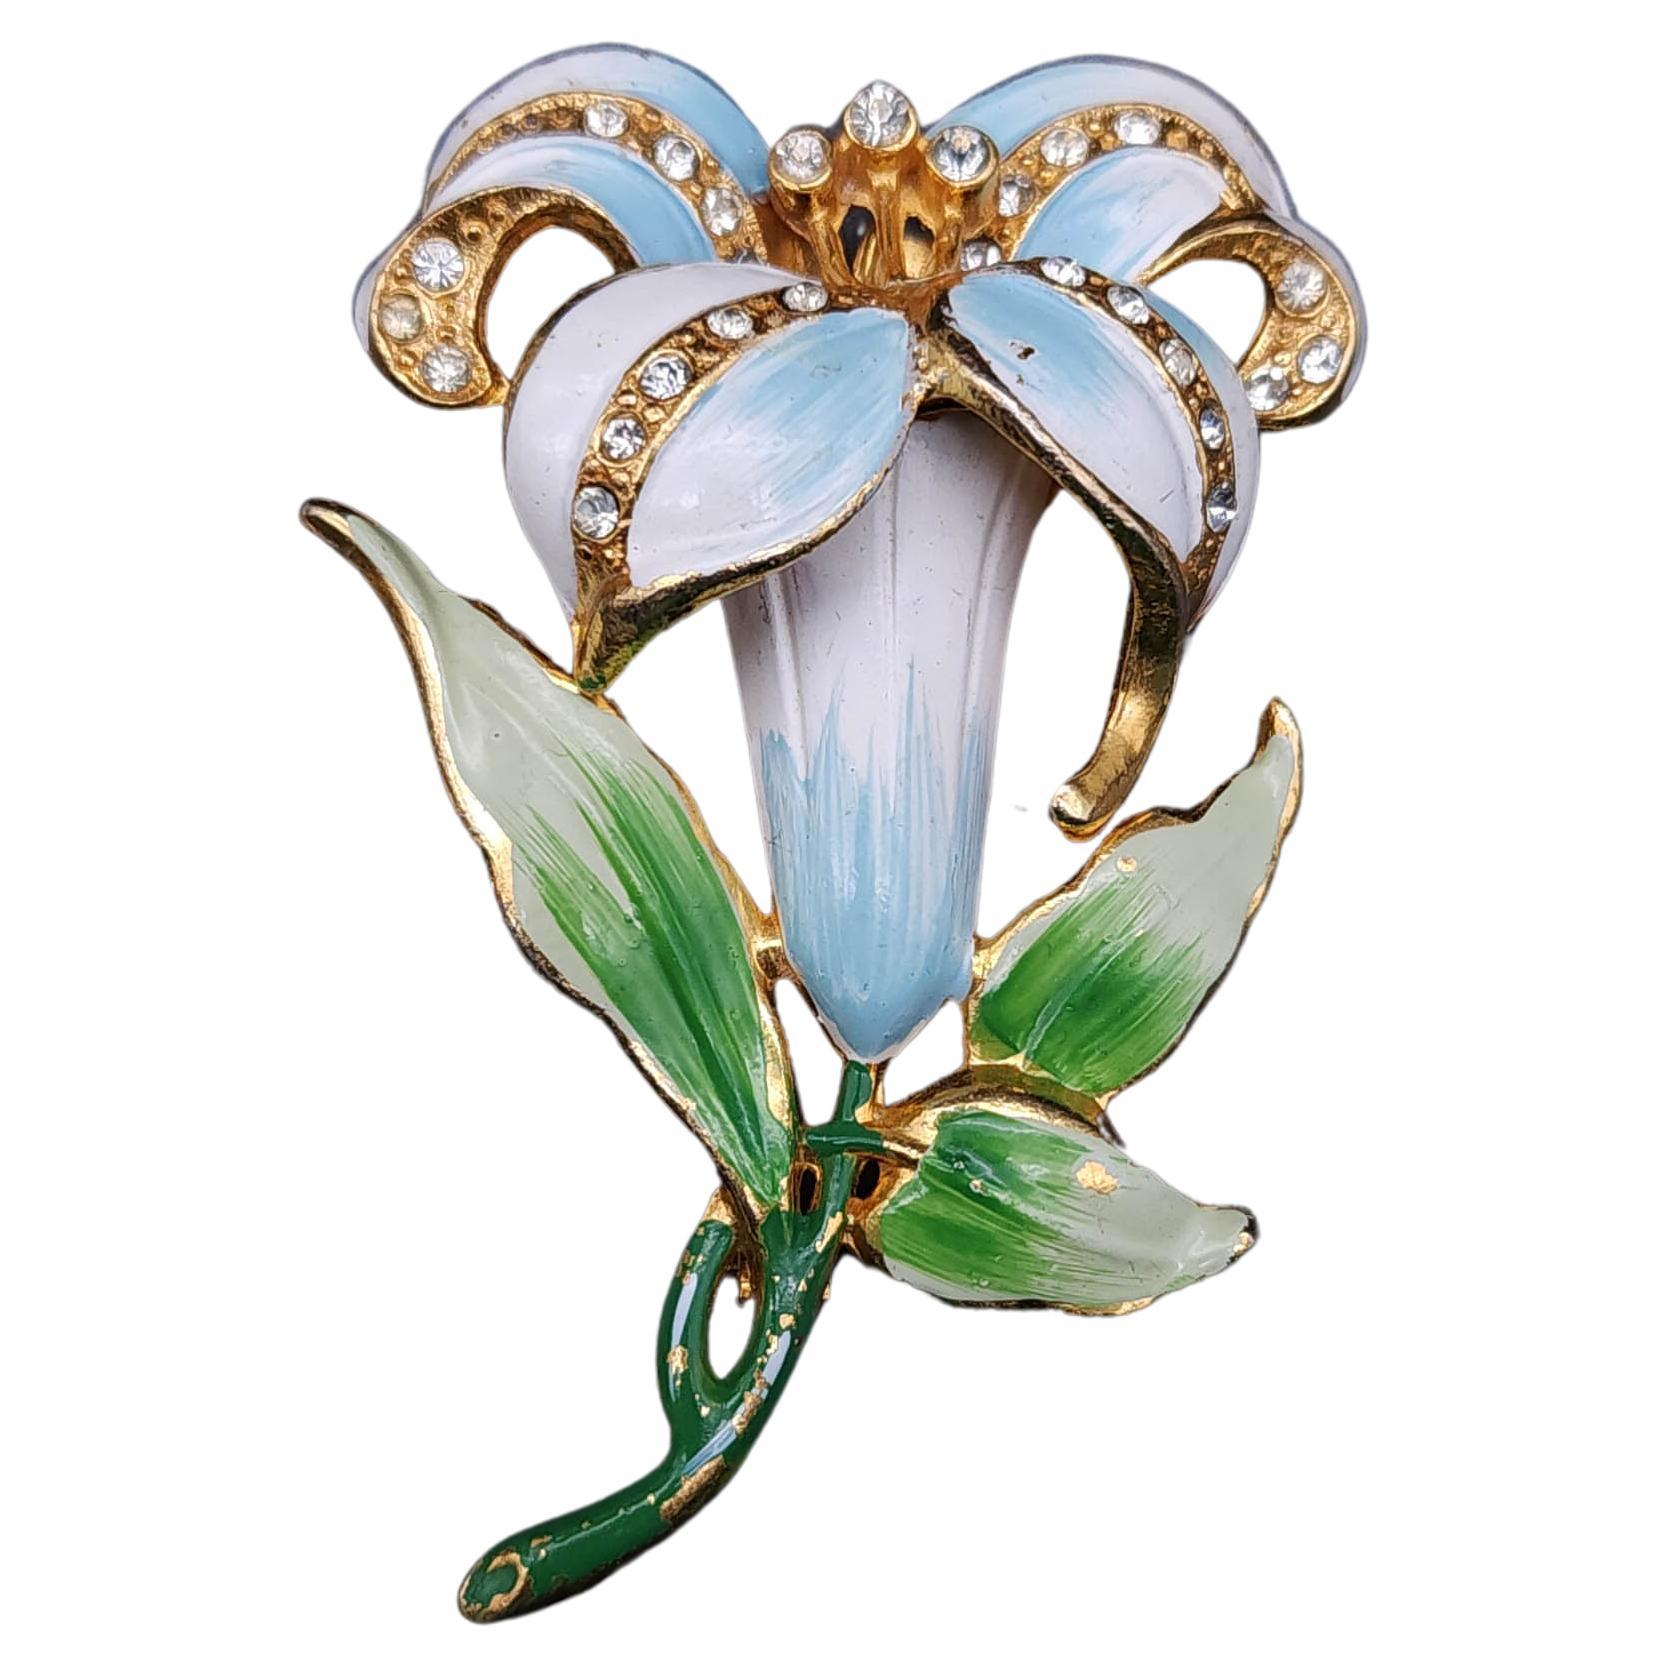 Vintage Coro Flower Pin Brooch, Green White Blue Enamel and Crystals, Gold For Sale